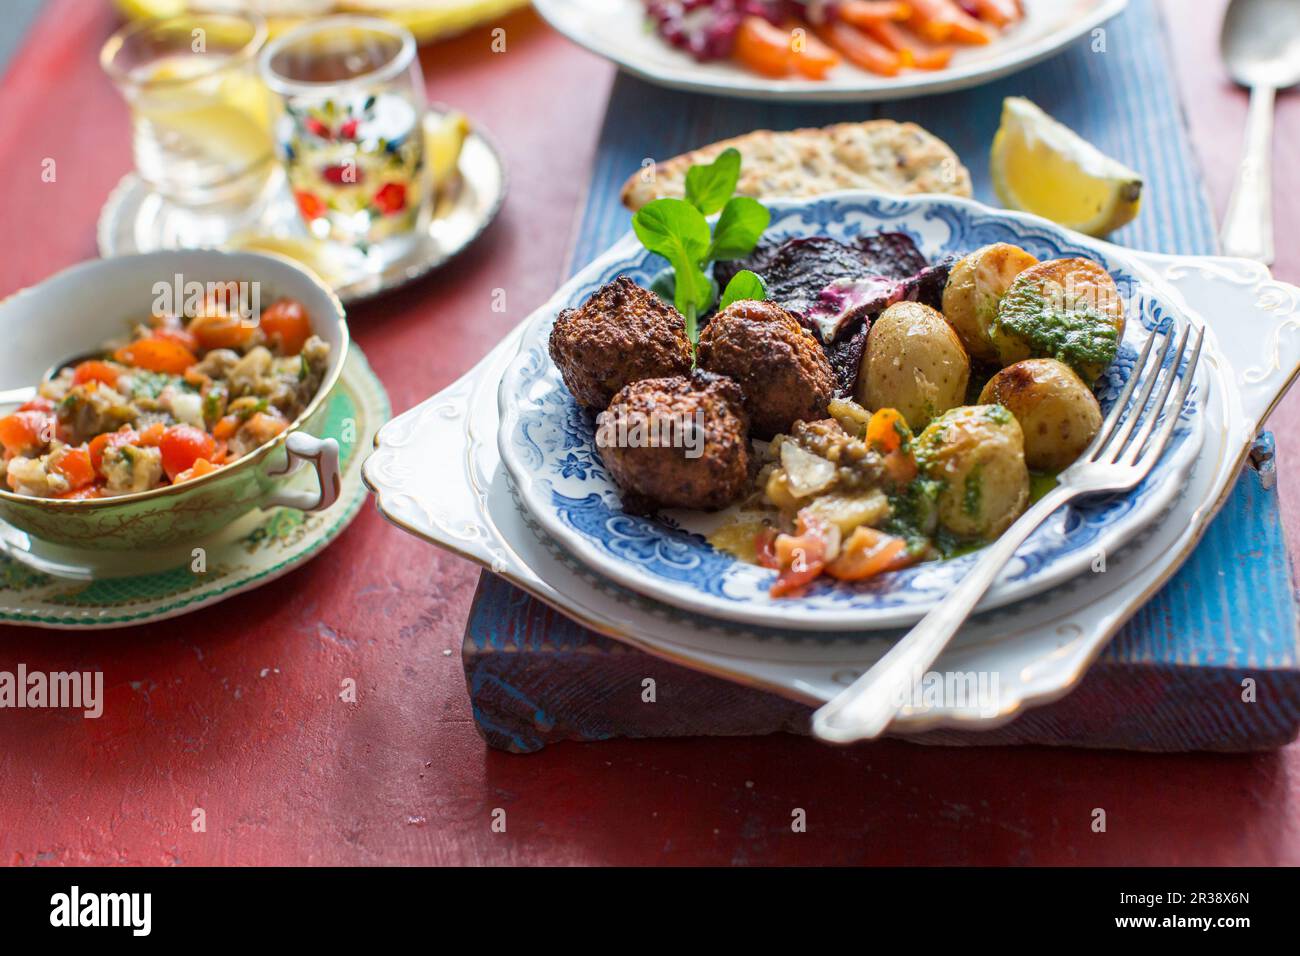 Middle easterrn supper with chickpea falafel, mutabal dip, roast potatoes and beetroot crips Stock Photo